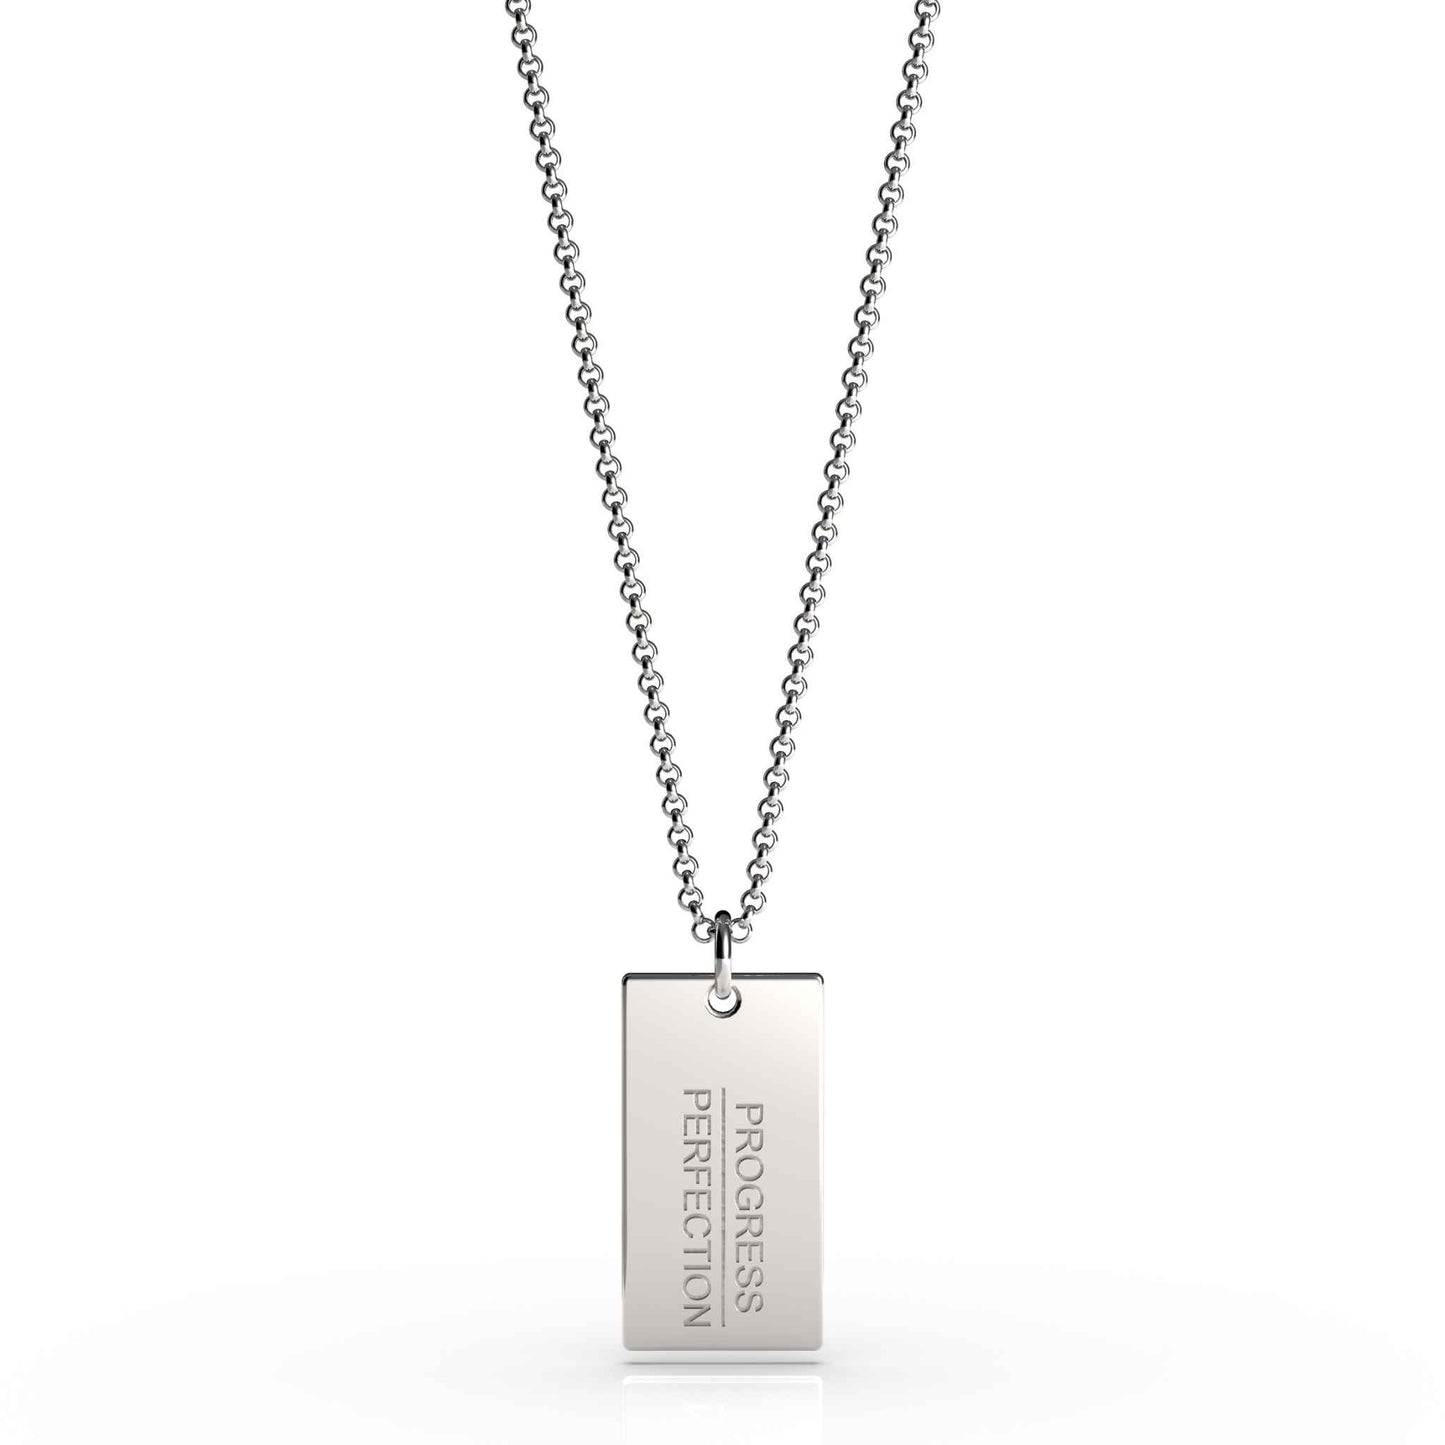 Mindfulness necklace | Progress over perfection | Meaningful jewelry